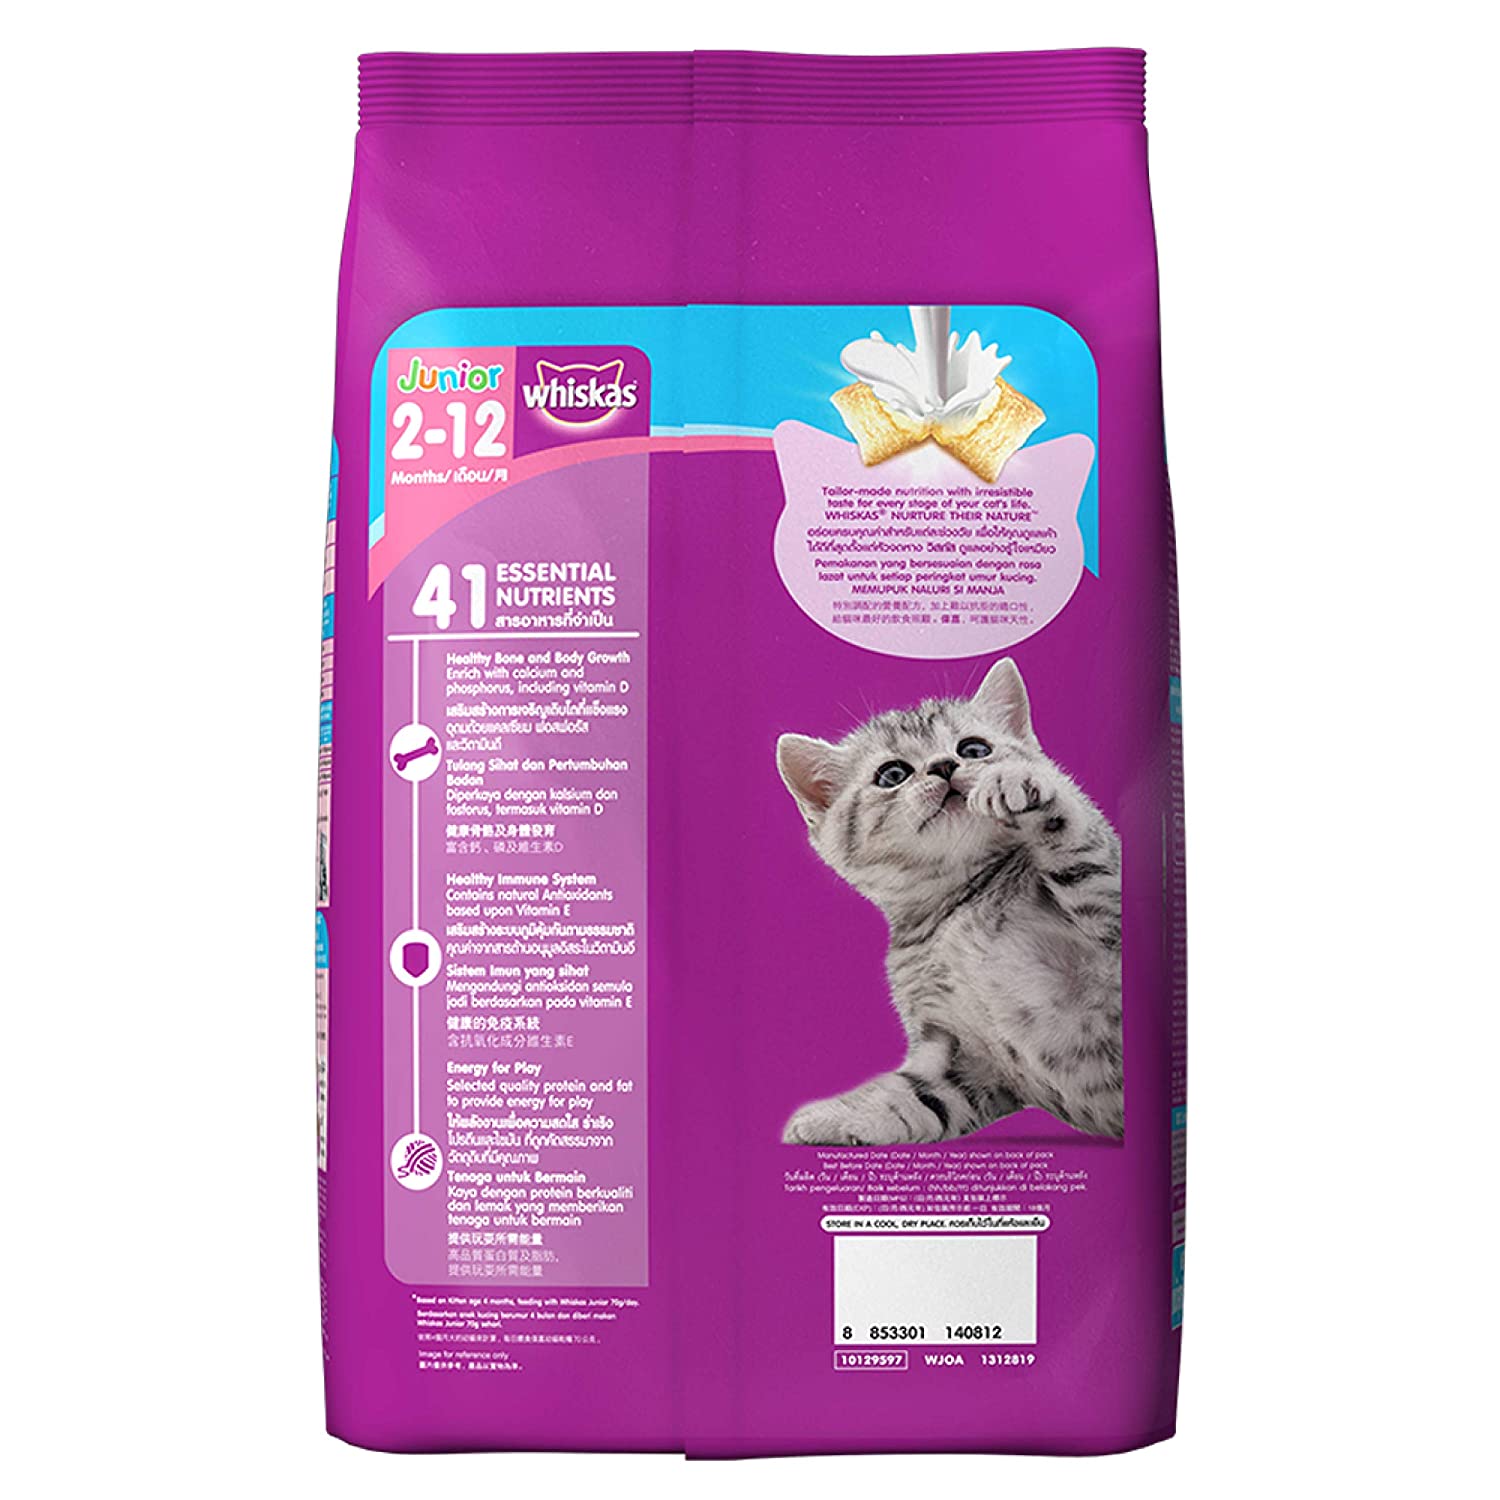 Whiskas Kitten Small (2-12 months) Dry Cat Food, Ocean Fish, 1.1kg Pack Flavour : Seafood